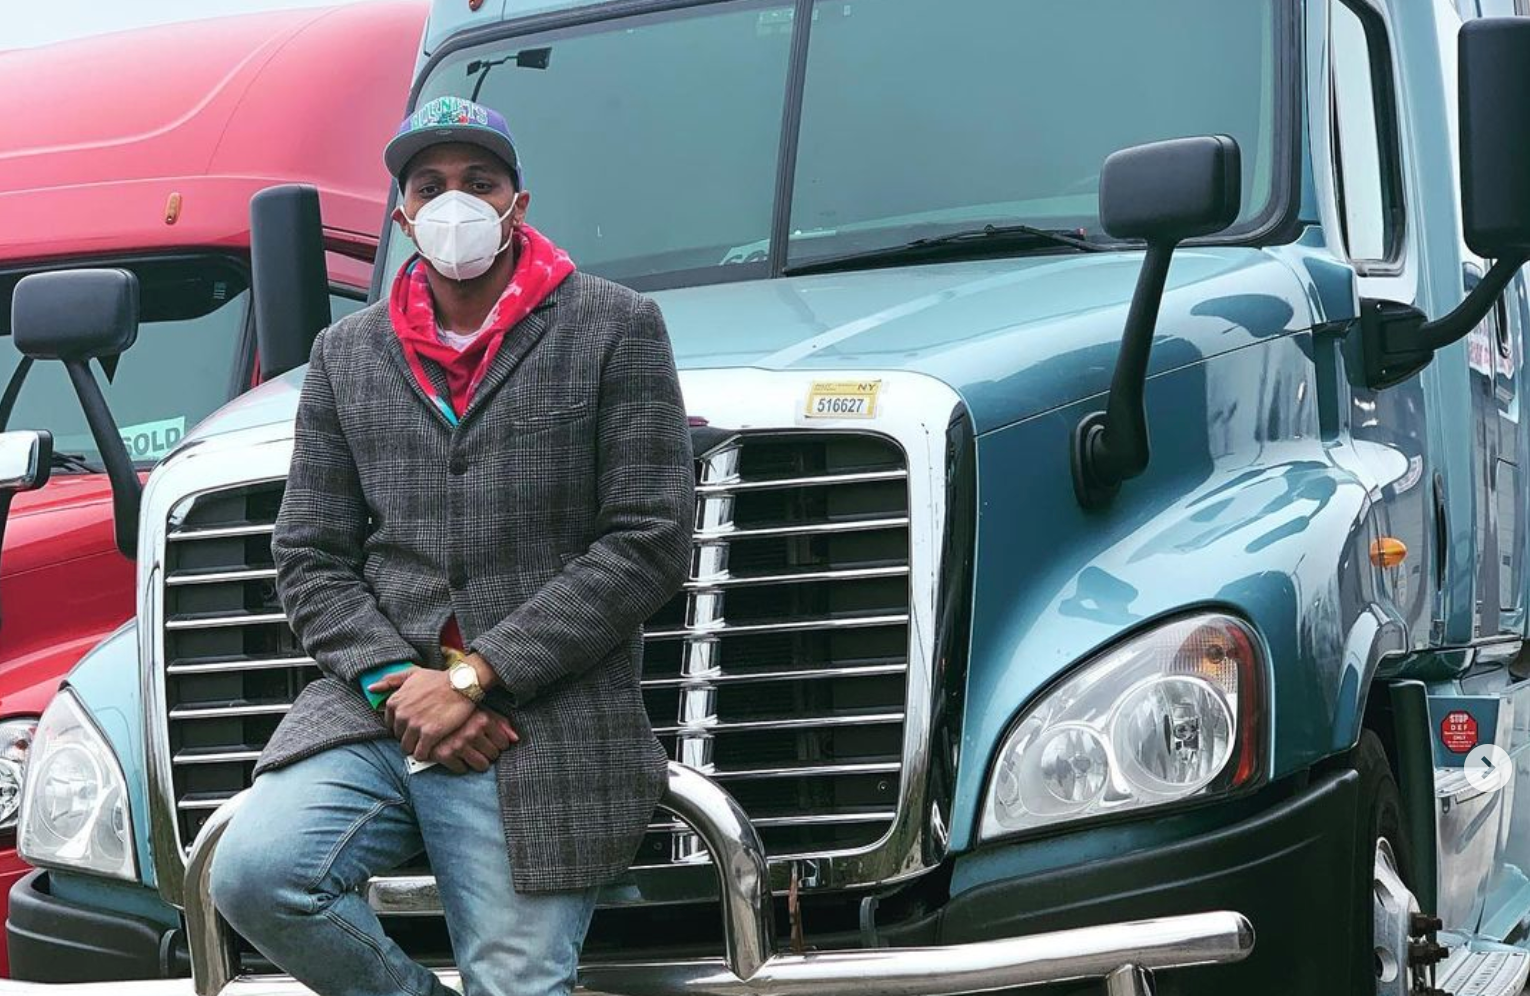 He Built a Six-Figure Freight Truck Business During the Pandemic After an Unexpected Lay Off. Here's How it Happened